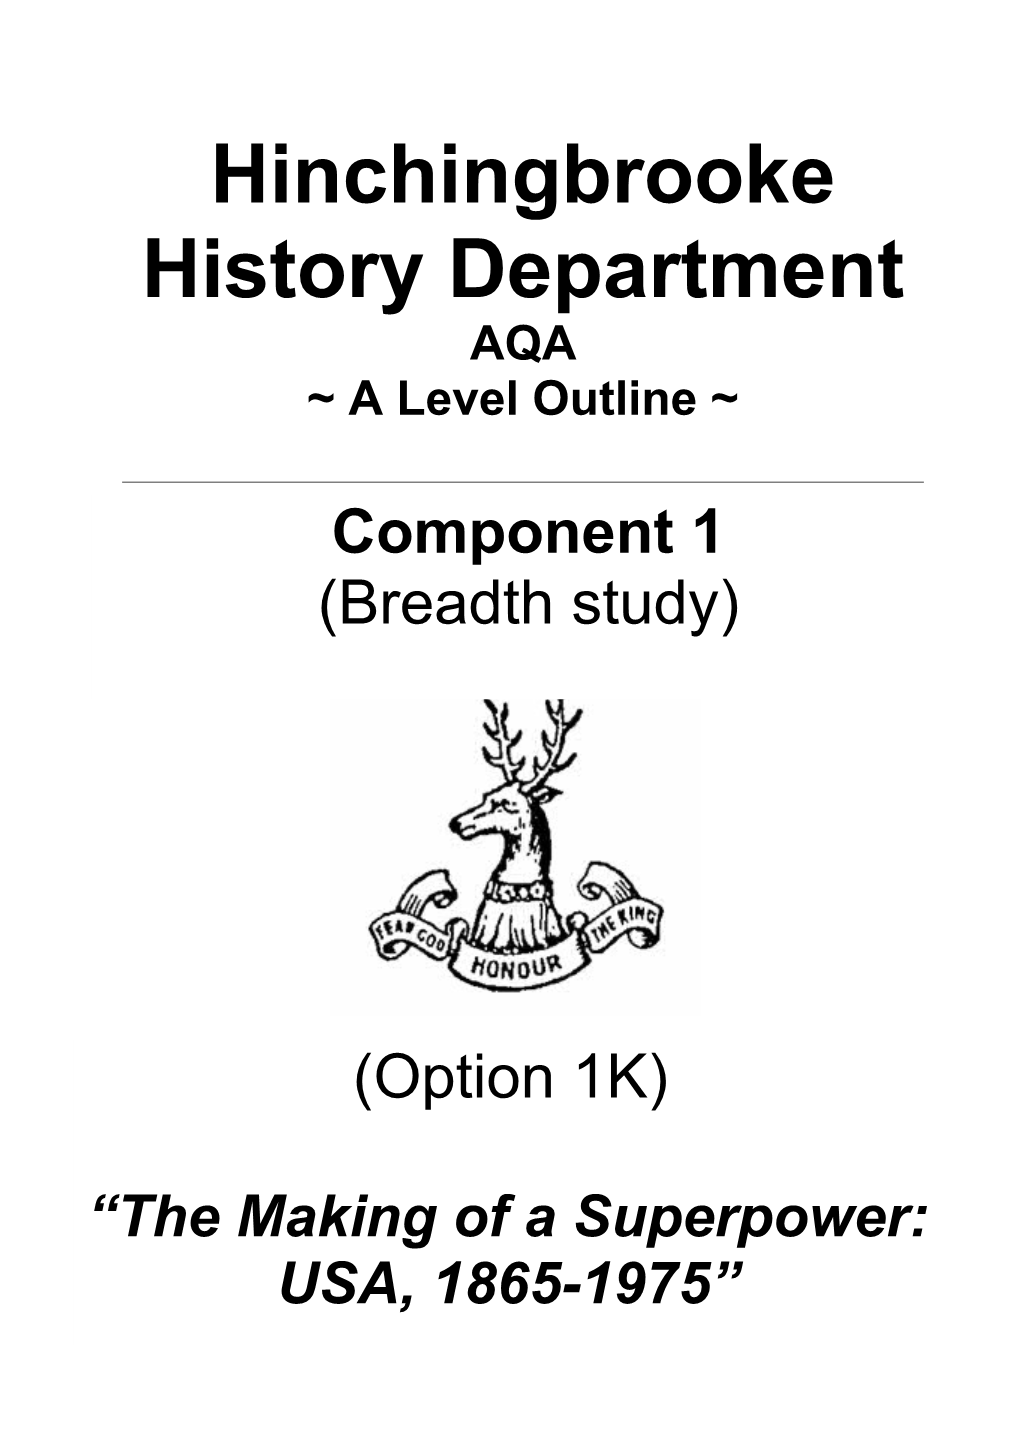 The Making of a Superpower: USA, 1865-1975